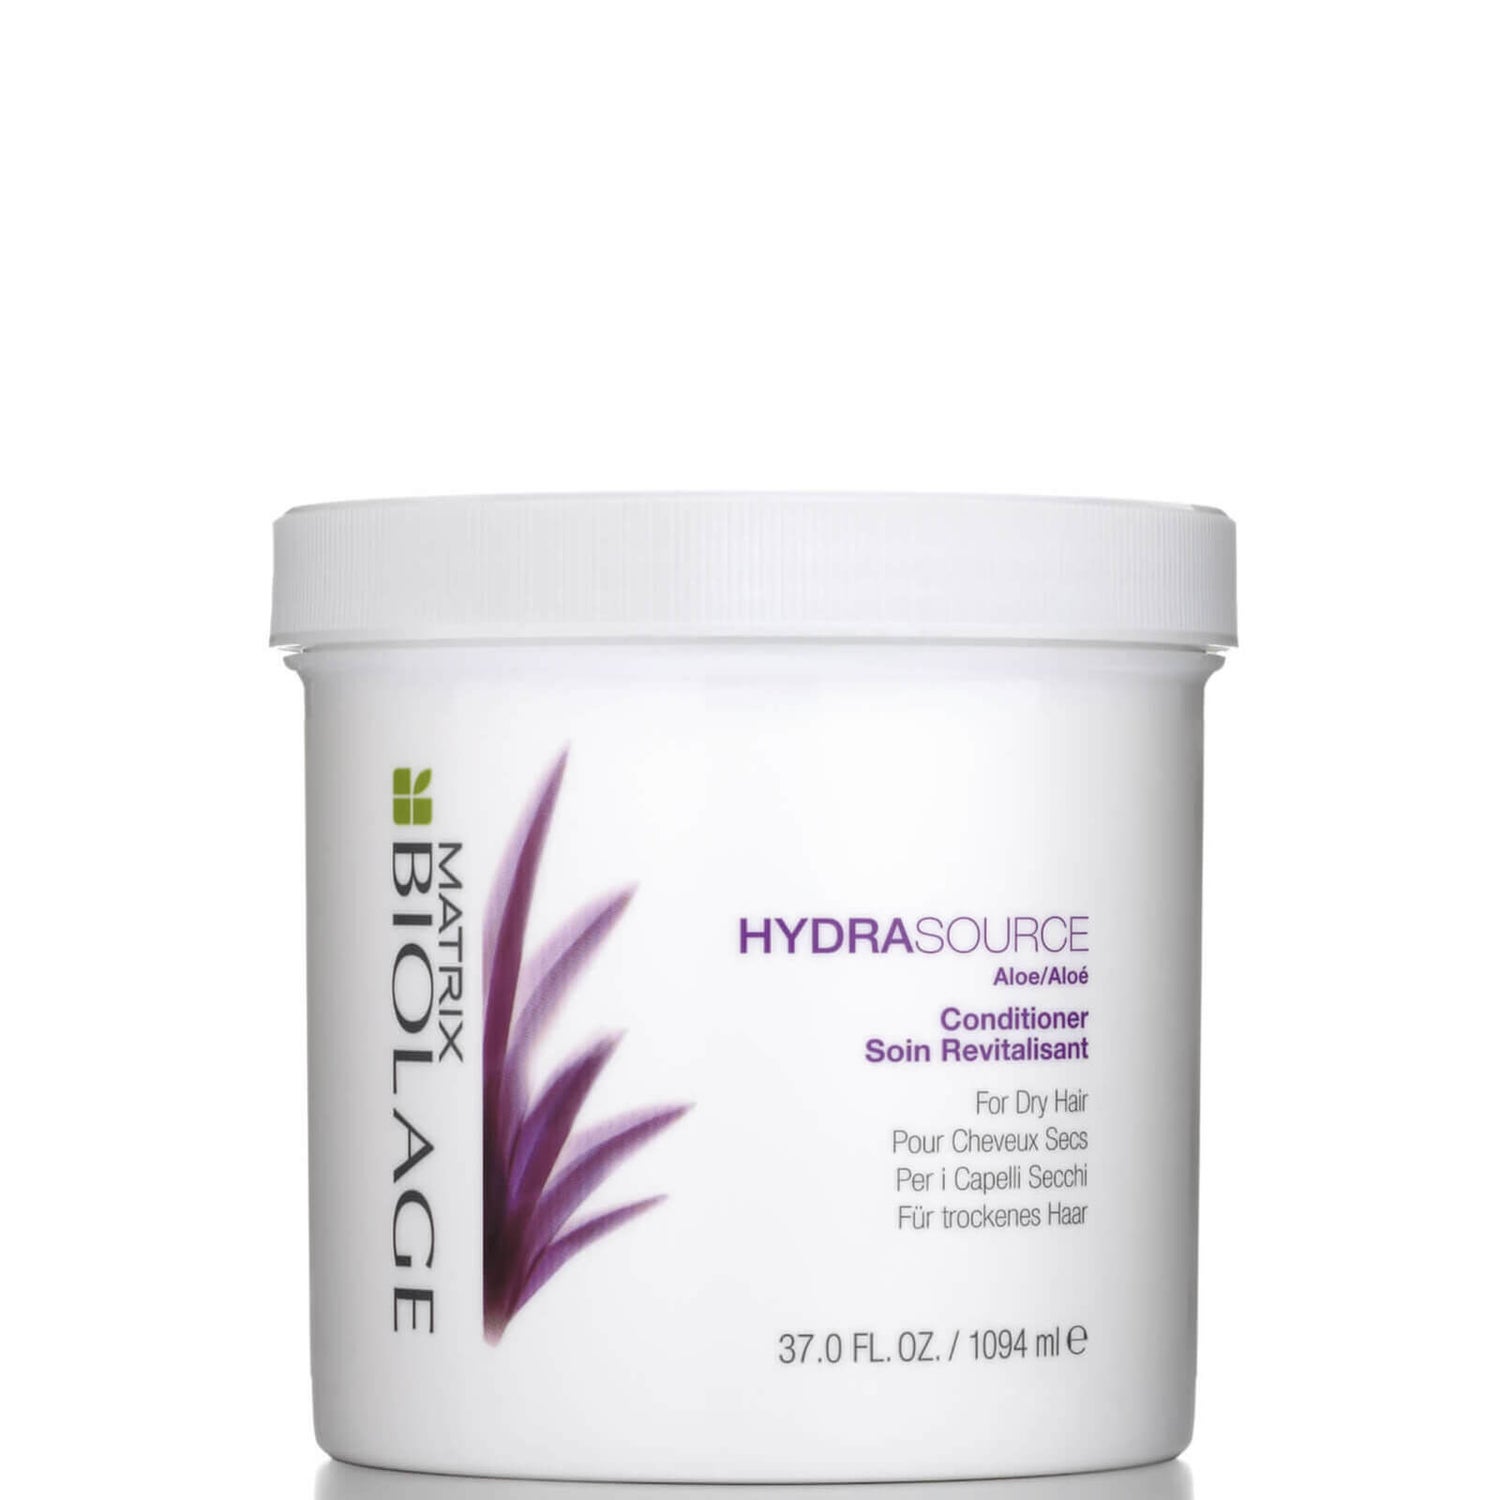 Biolage HydraSource Dry Hair Conditioner Hydrating Conditioner for Dry Hair 1094ml